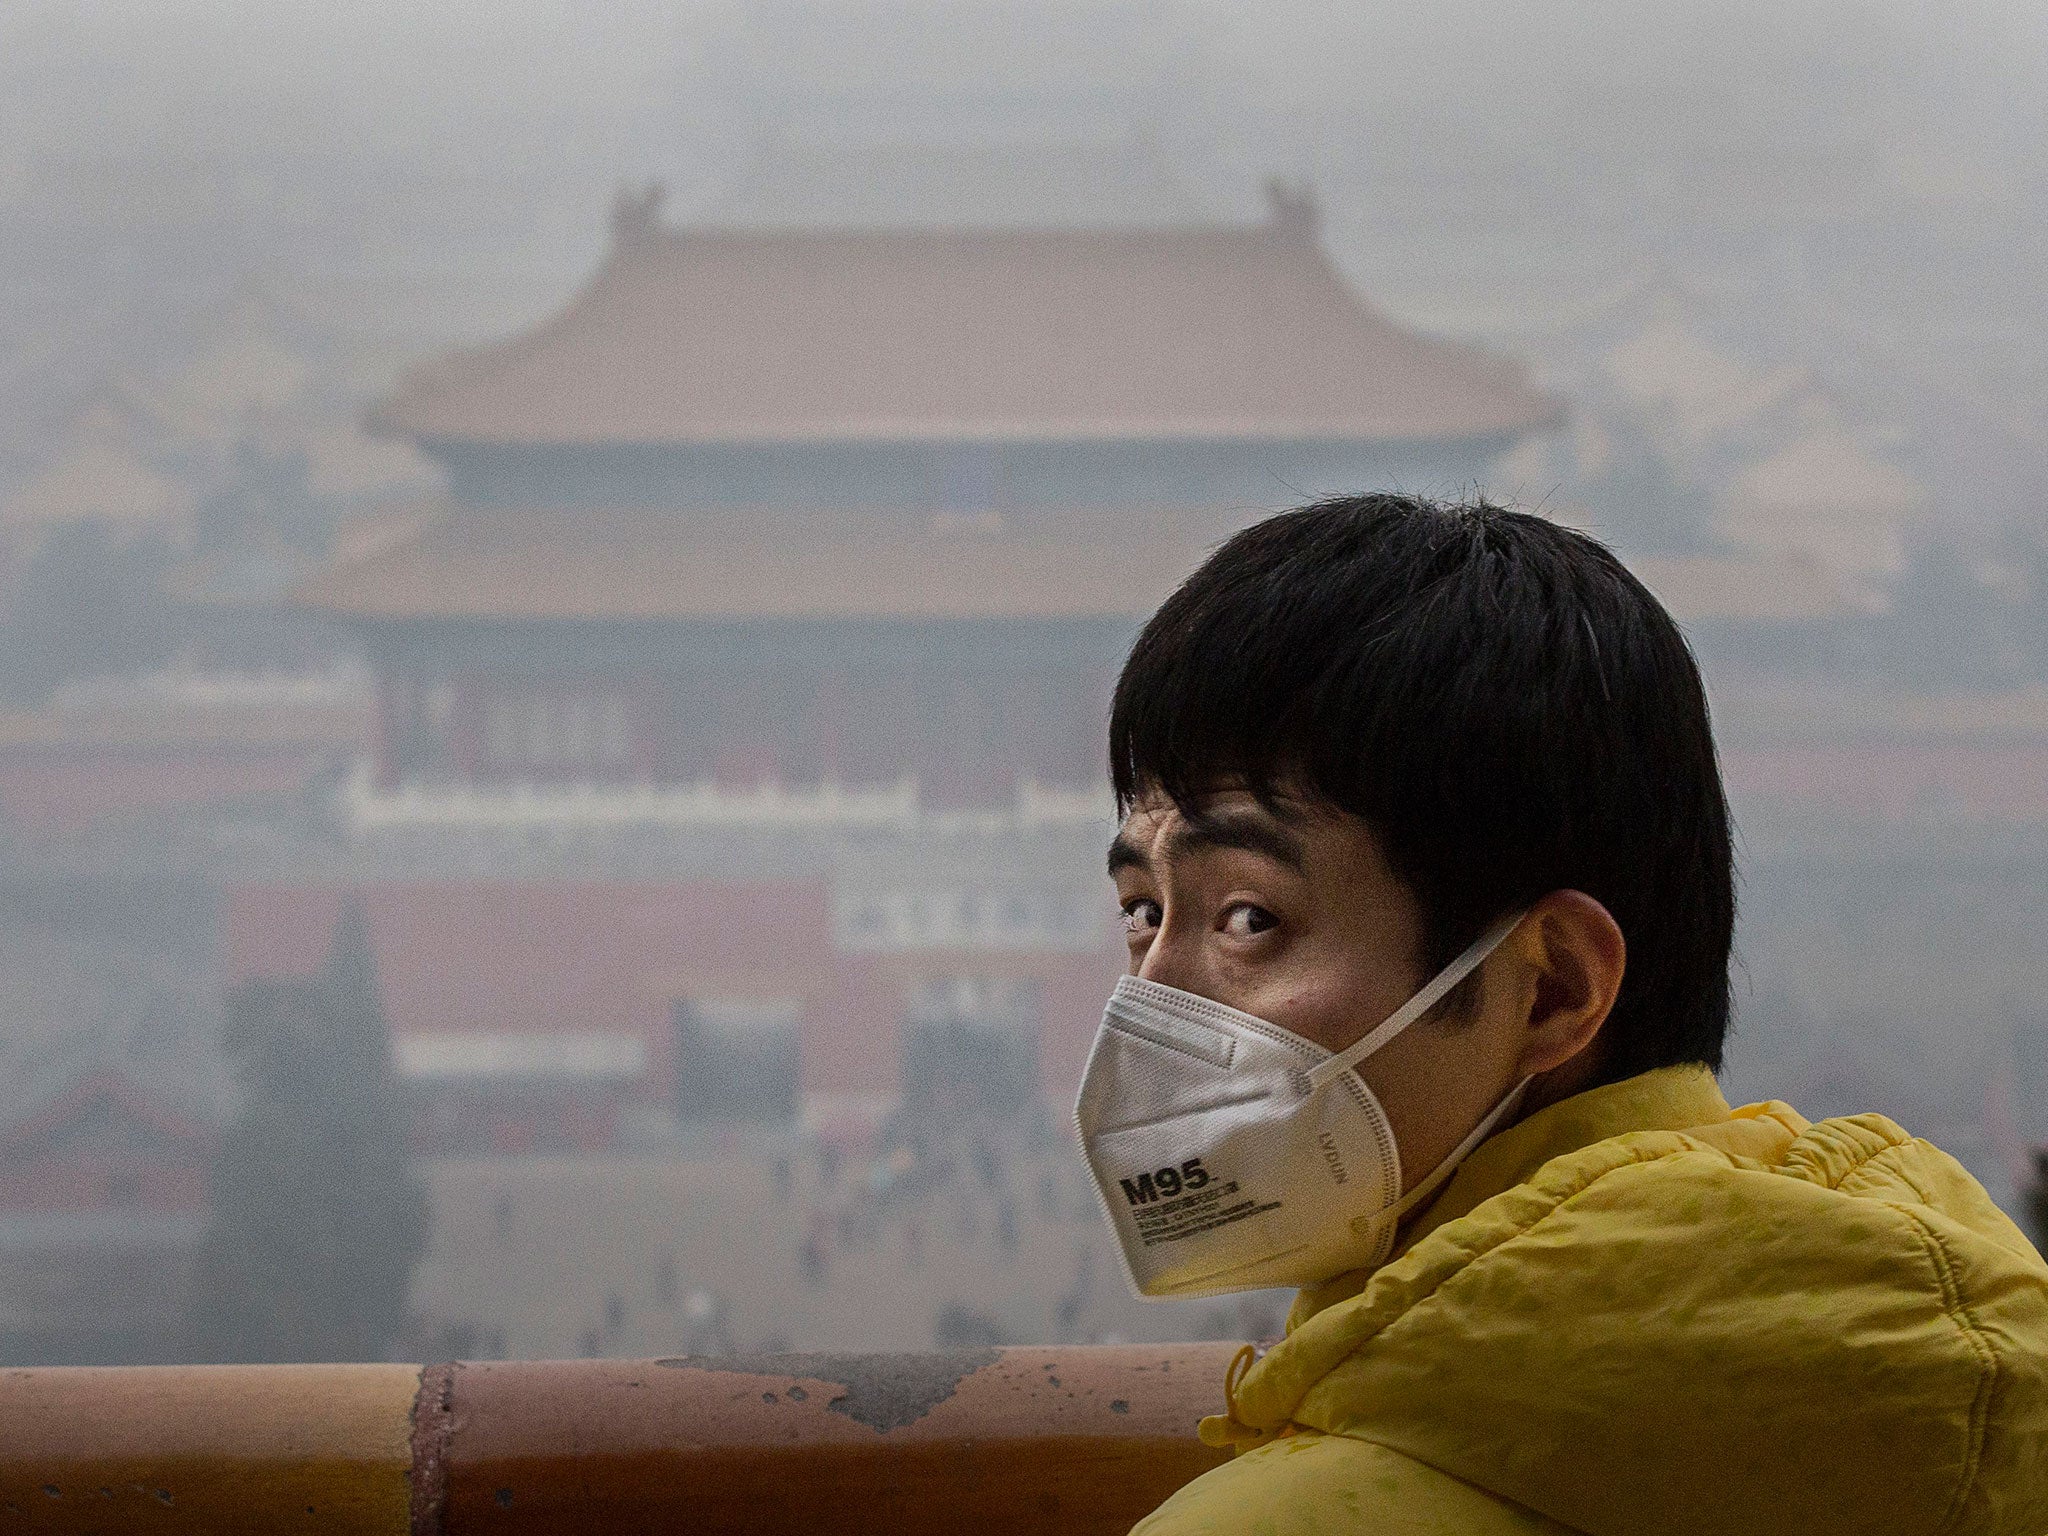 Air pollution levels in some parts of China are dangerously high